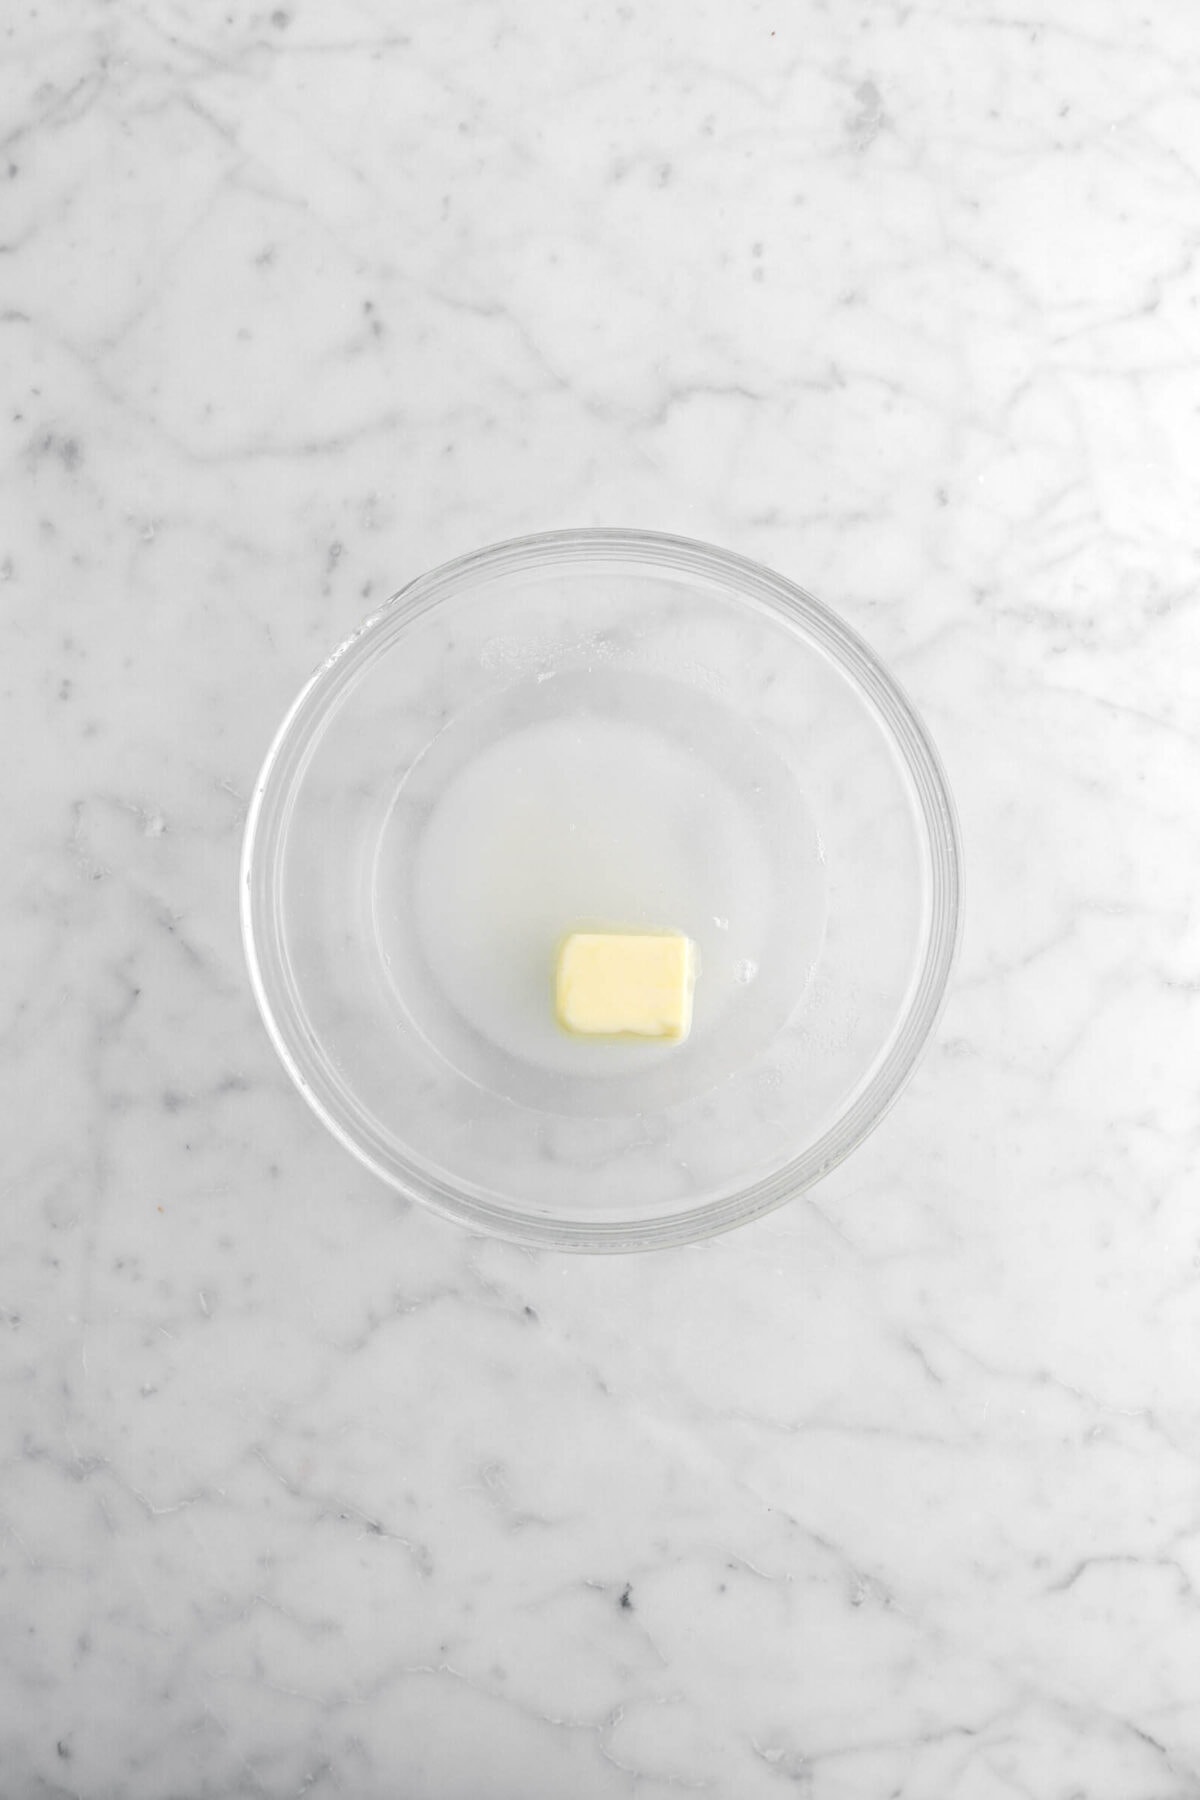 sugar, butter, and water in glass bowl.